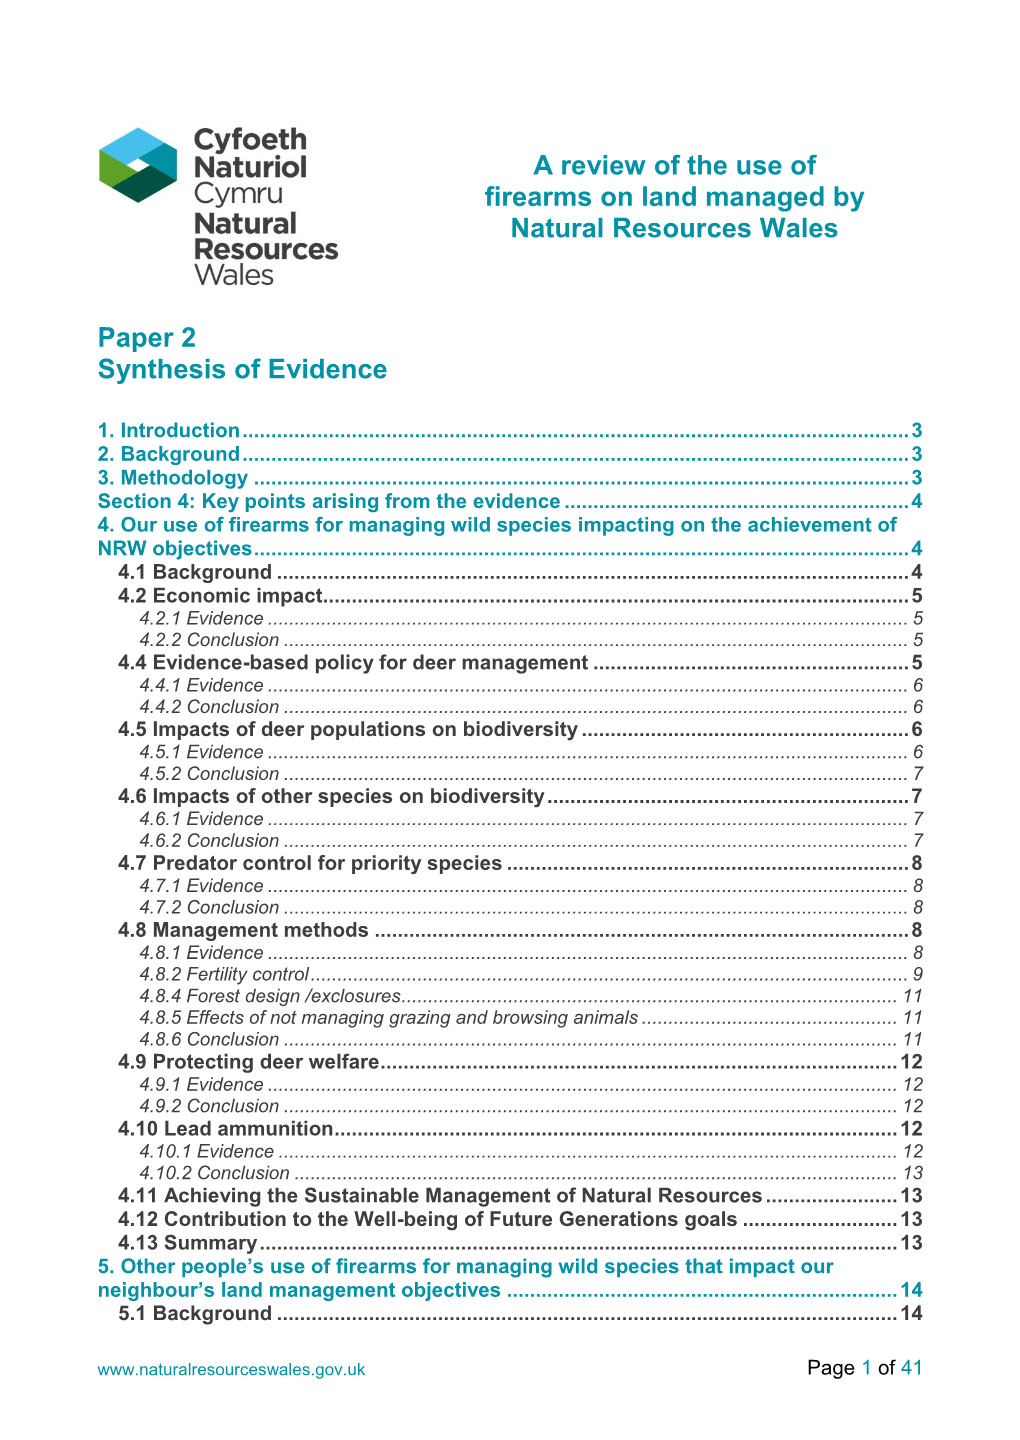 A Review of the Use of Firearms on Land Managed by Natural Resources Wales